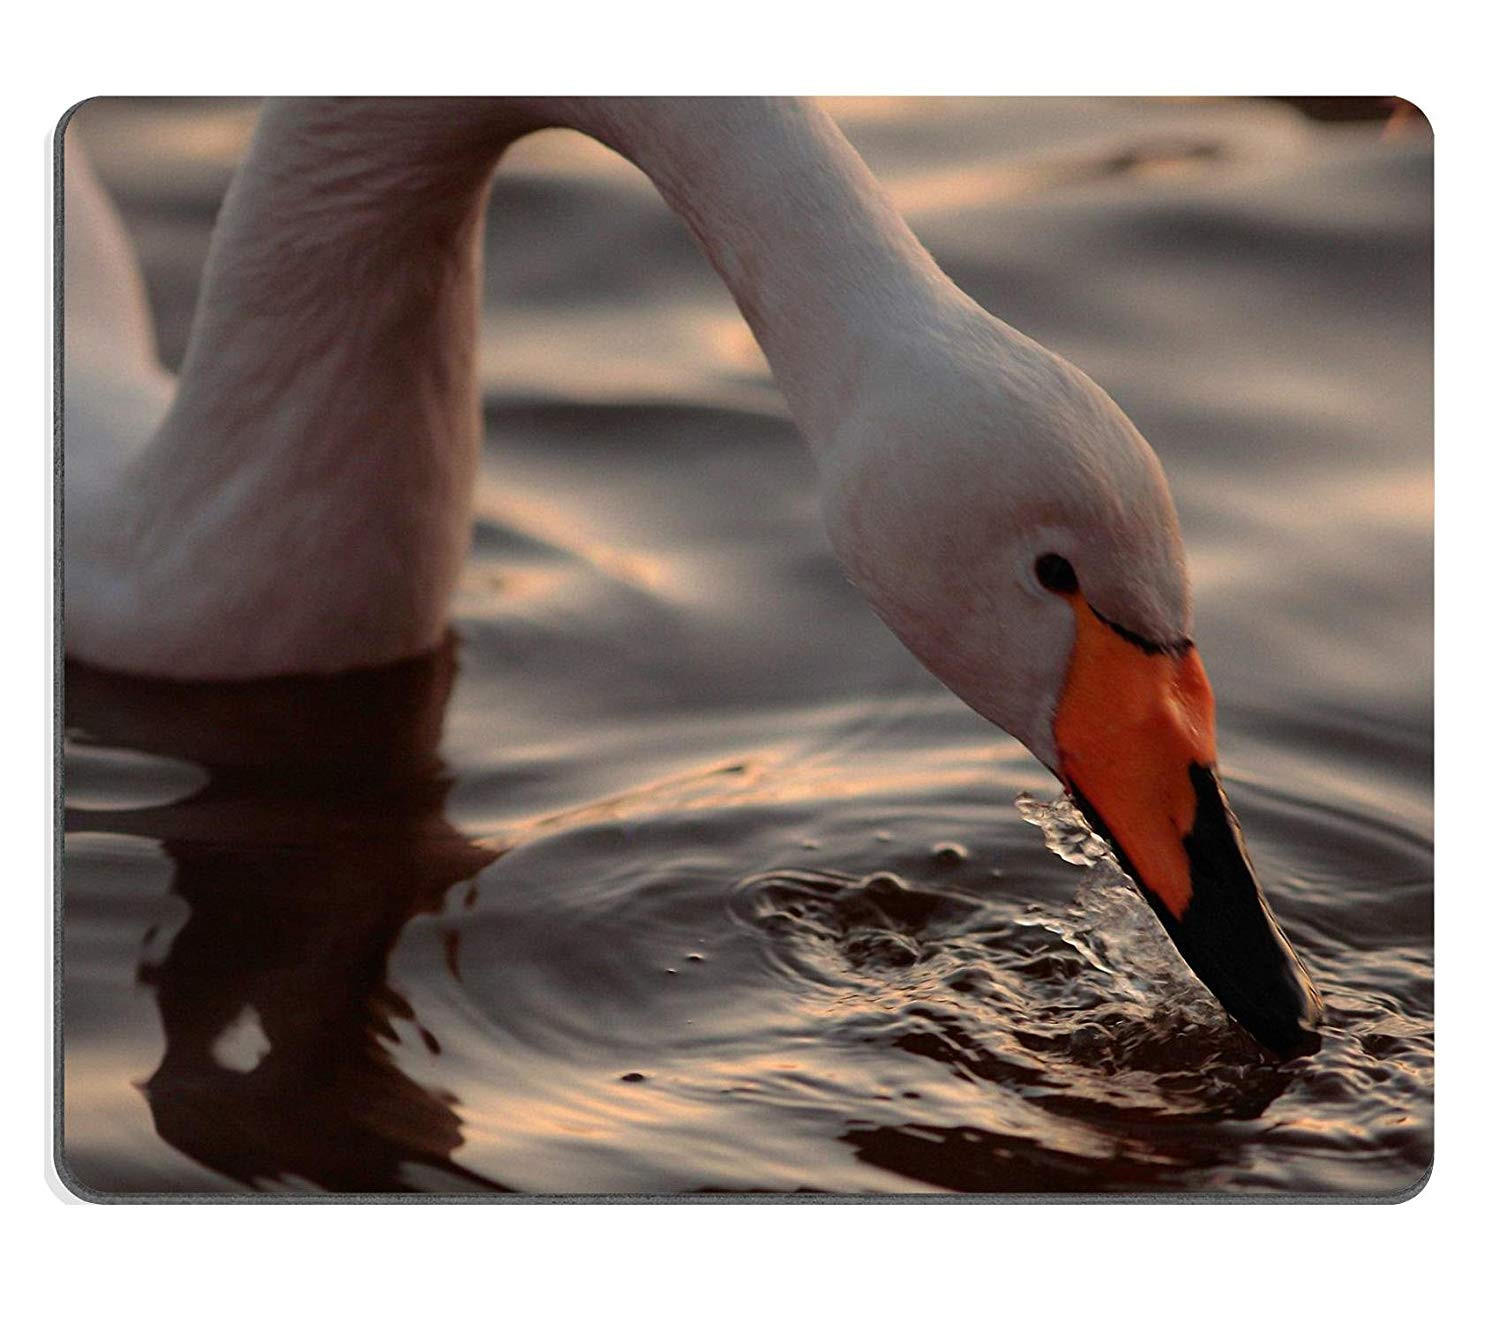 11 Elegant Hand Blown Glass Swan Vases 2024 free download hand blown glass swan vases of amazon com msd mousepad image id 24592374 a closeup portrait of in amazon com msd mousepad image id 24592374 a closeup portrait of whooper swan drinking from t